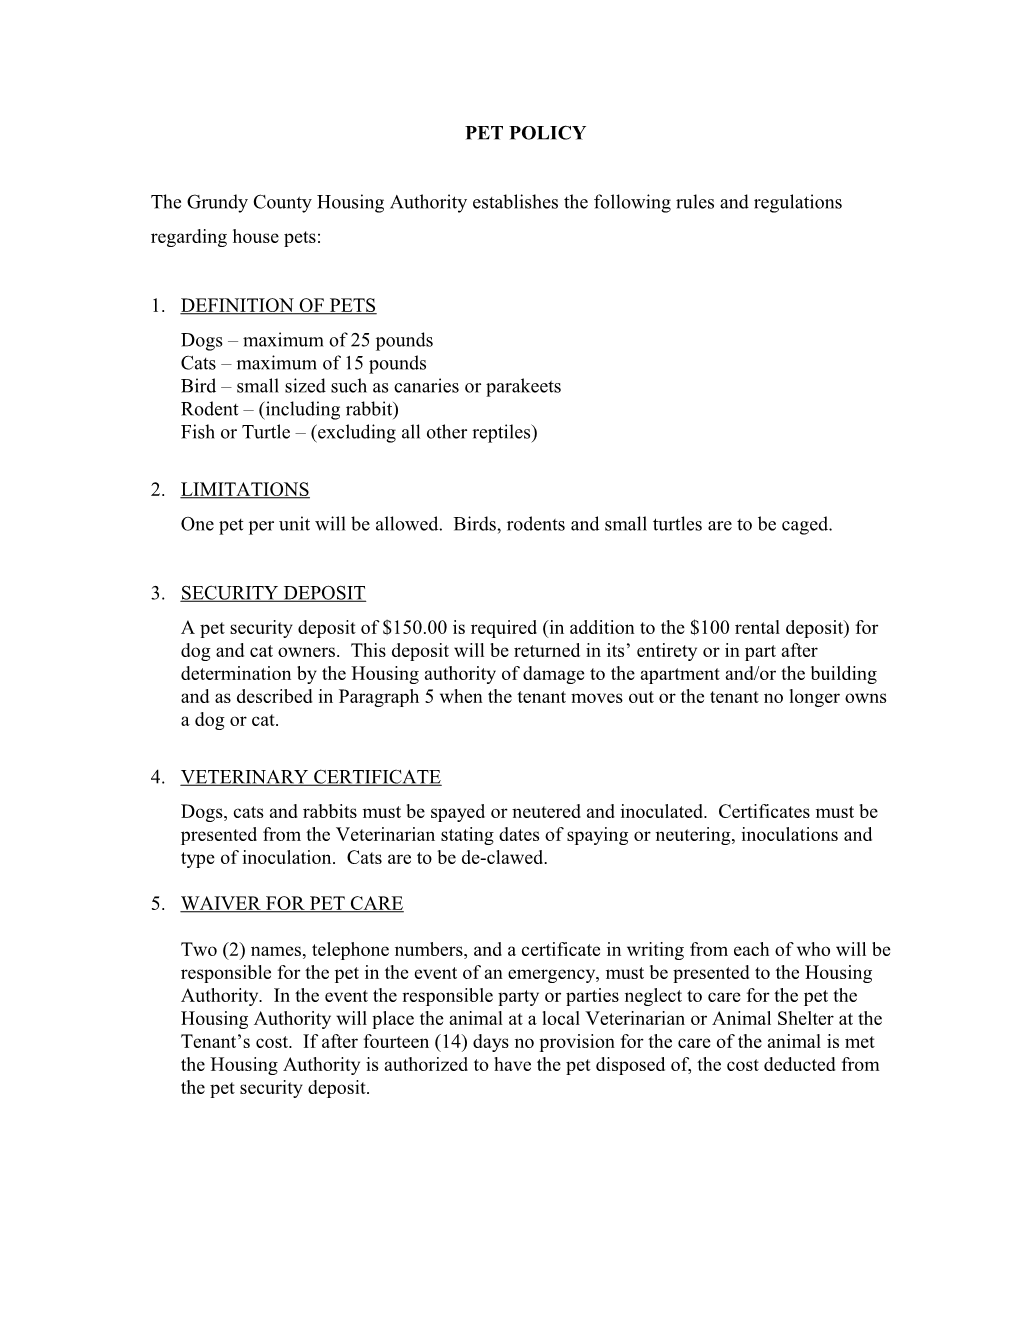 The Grundy County Housing Authority Establishes the Following Rules and Regulations Regarding